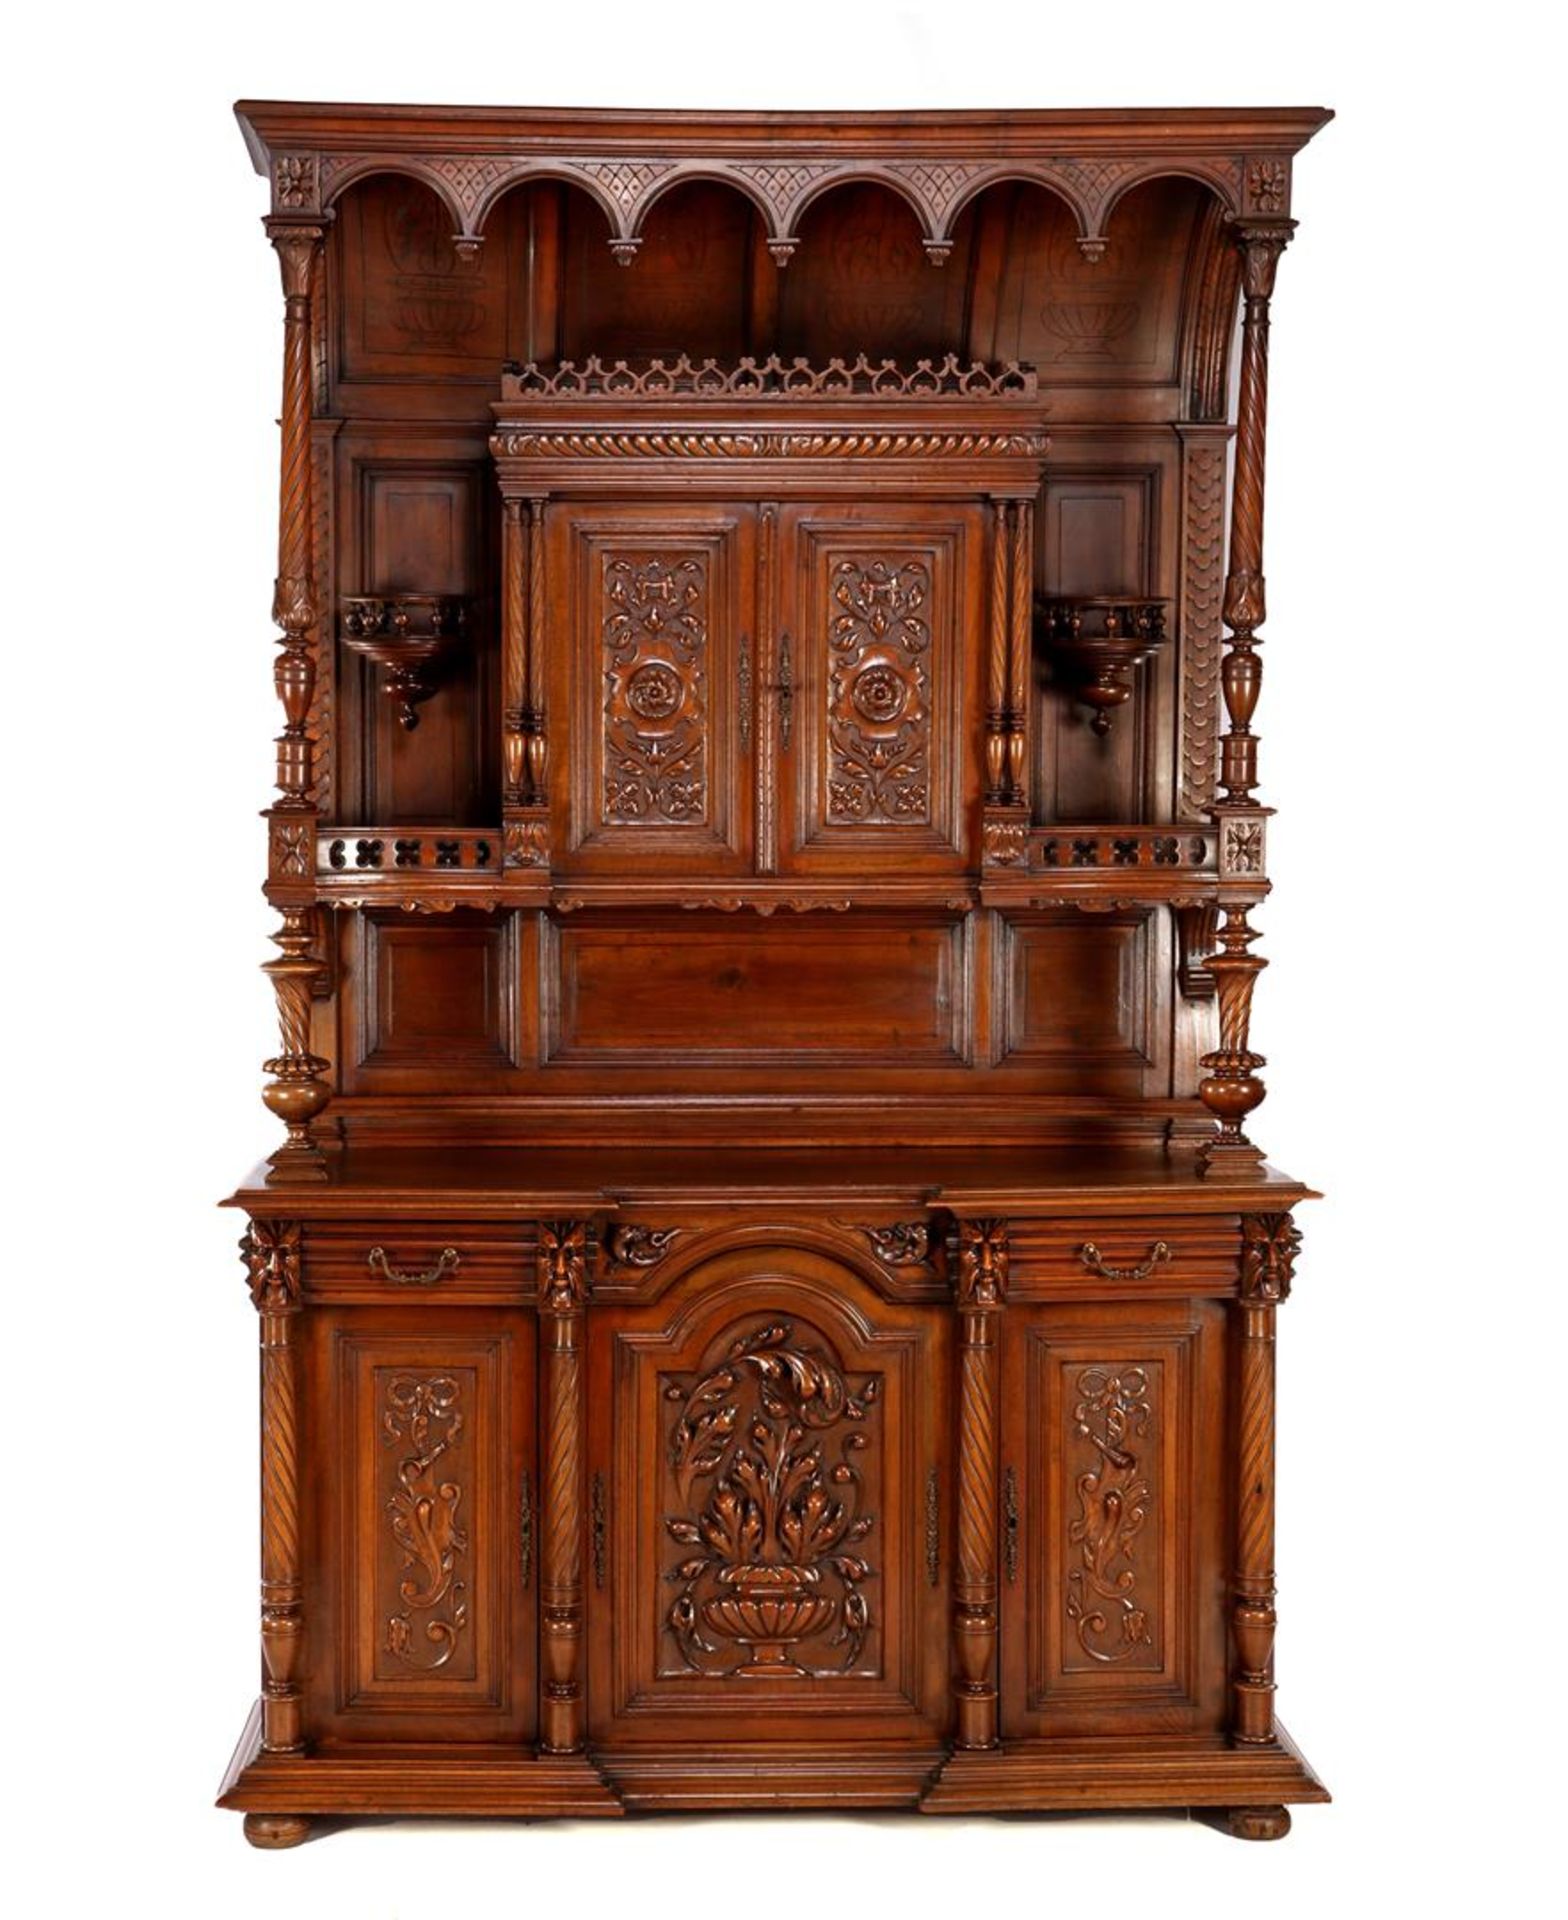 Walnut cabinet with richly carved décor